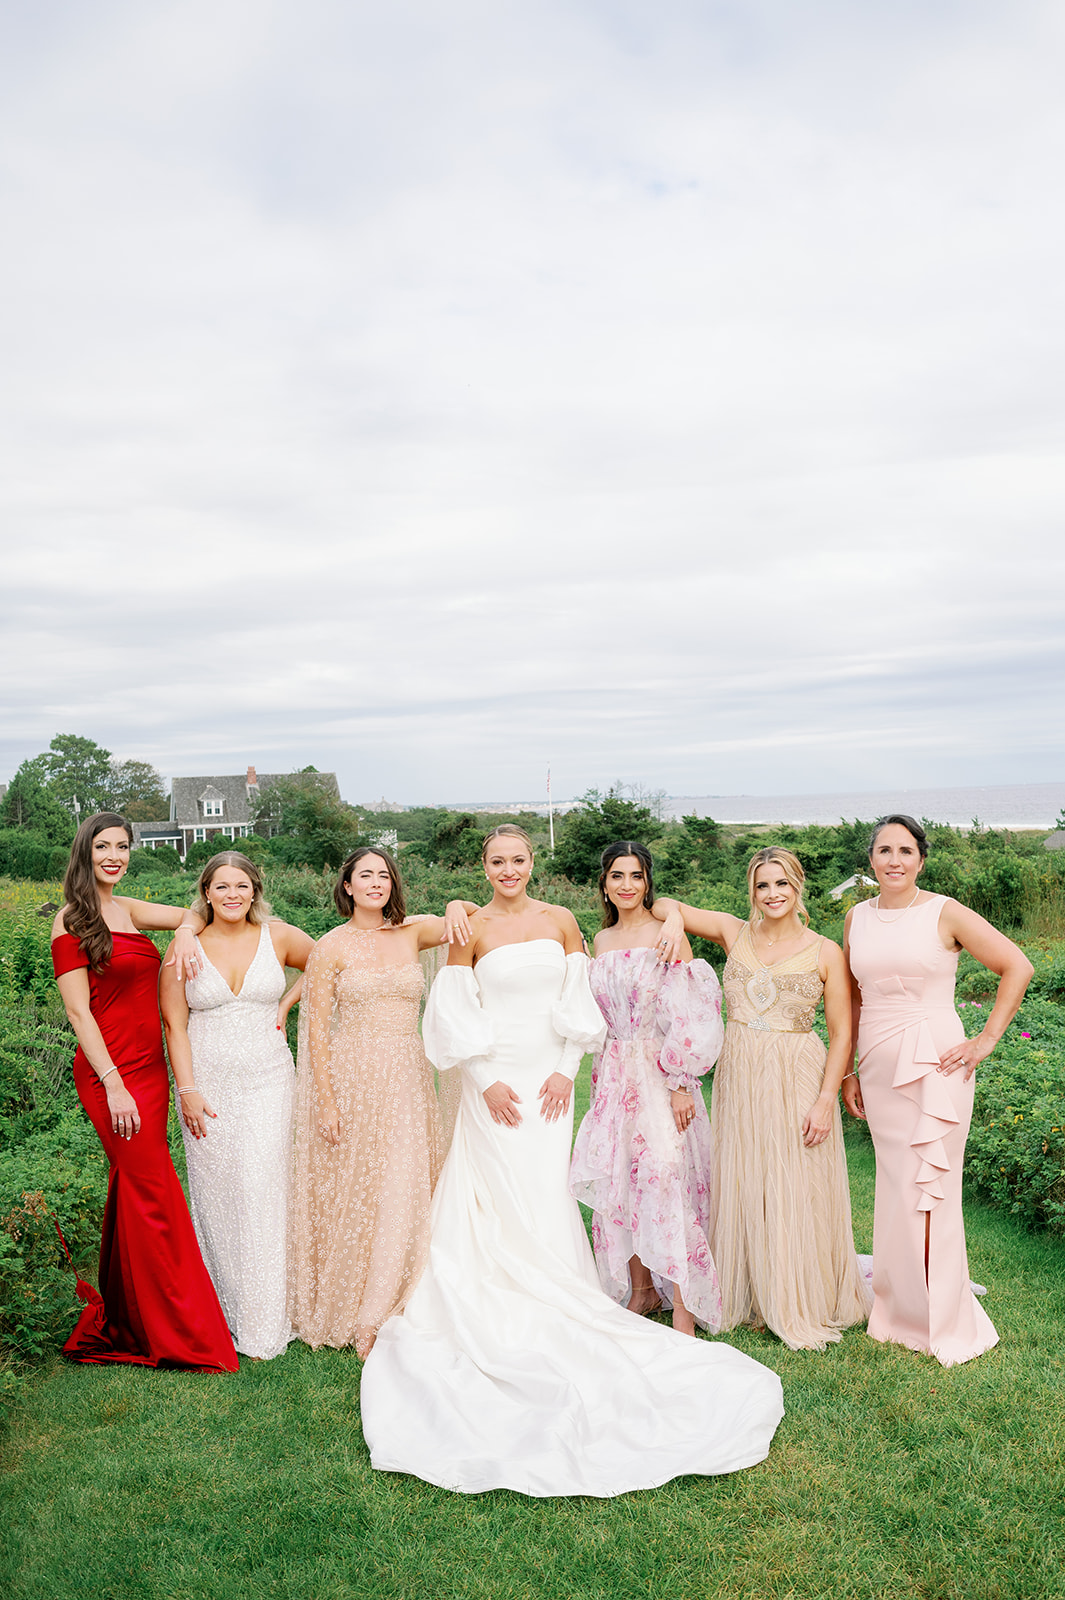 Romantic garden wedding bridal party with mismatched bridesmaid dresses in shades of pink, gold and red. 